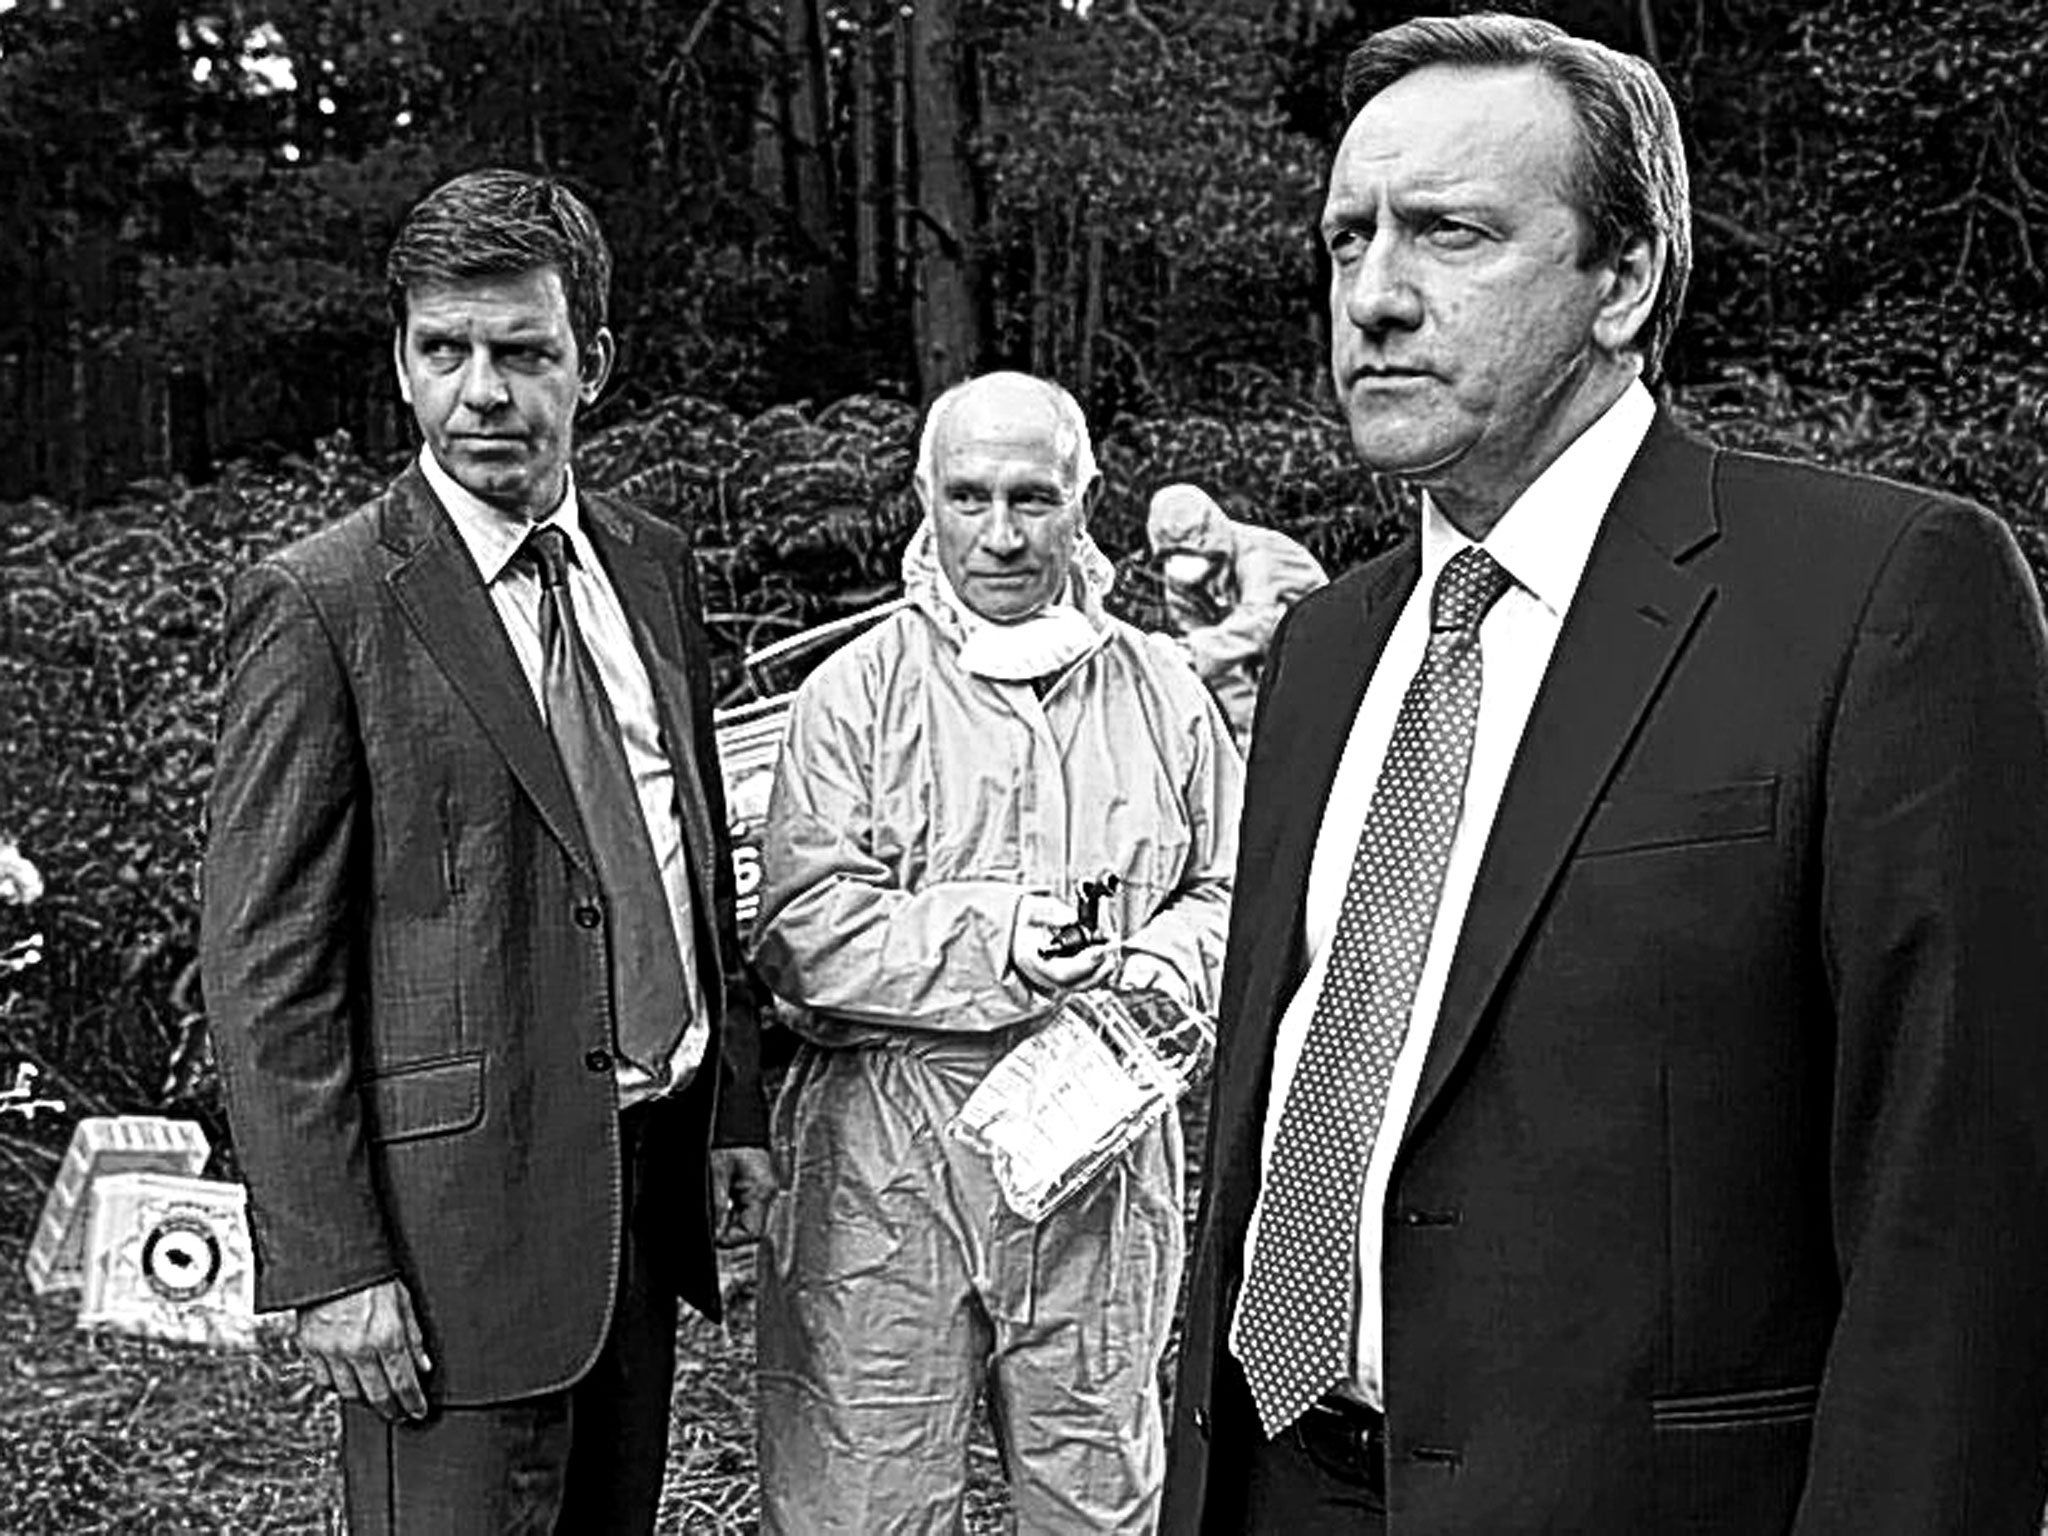 Jackson, centre, in one of his final appearances in 'Midsomer Murders'